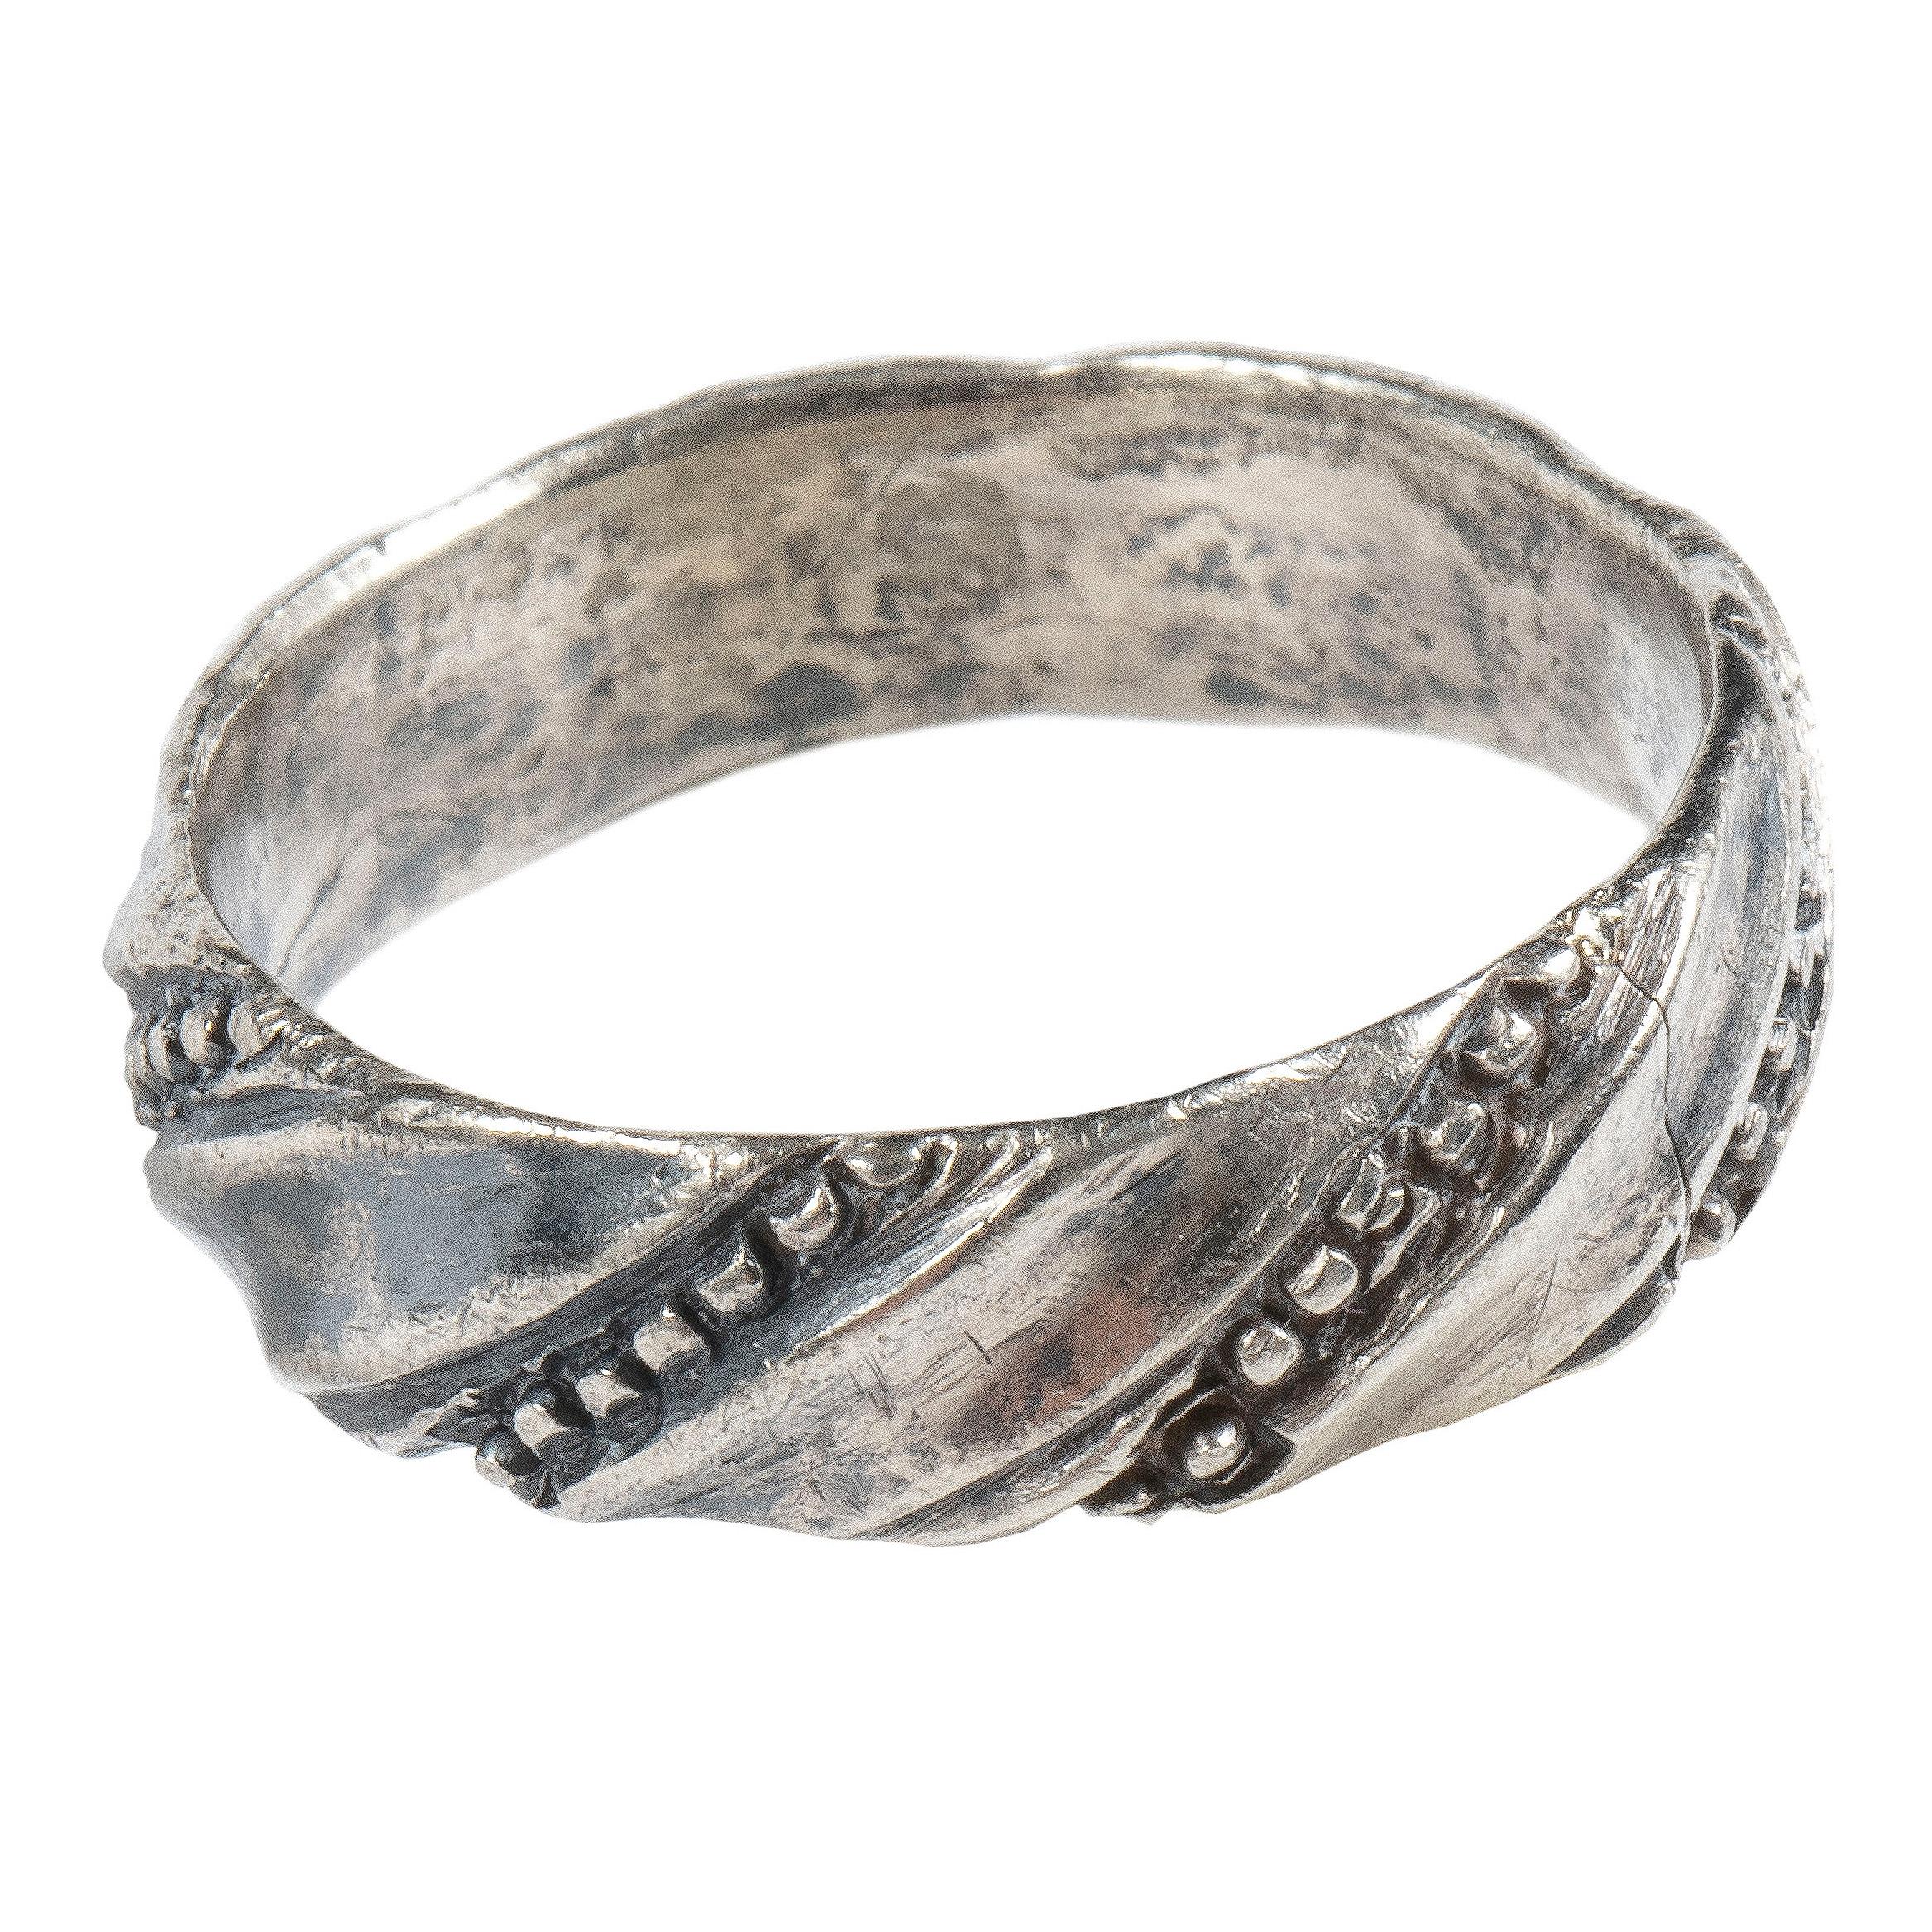 Twisted Band Ring  
Silver  
England, 15th-16th century  
Weight 2.9 gr.; circumference 51.9 mm.; US size 6, UK size M  

The wide silver hoop is slightly rounded inside with an original solder point and twisted and beaded on the outer side. Between